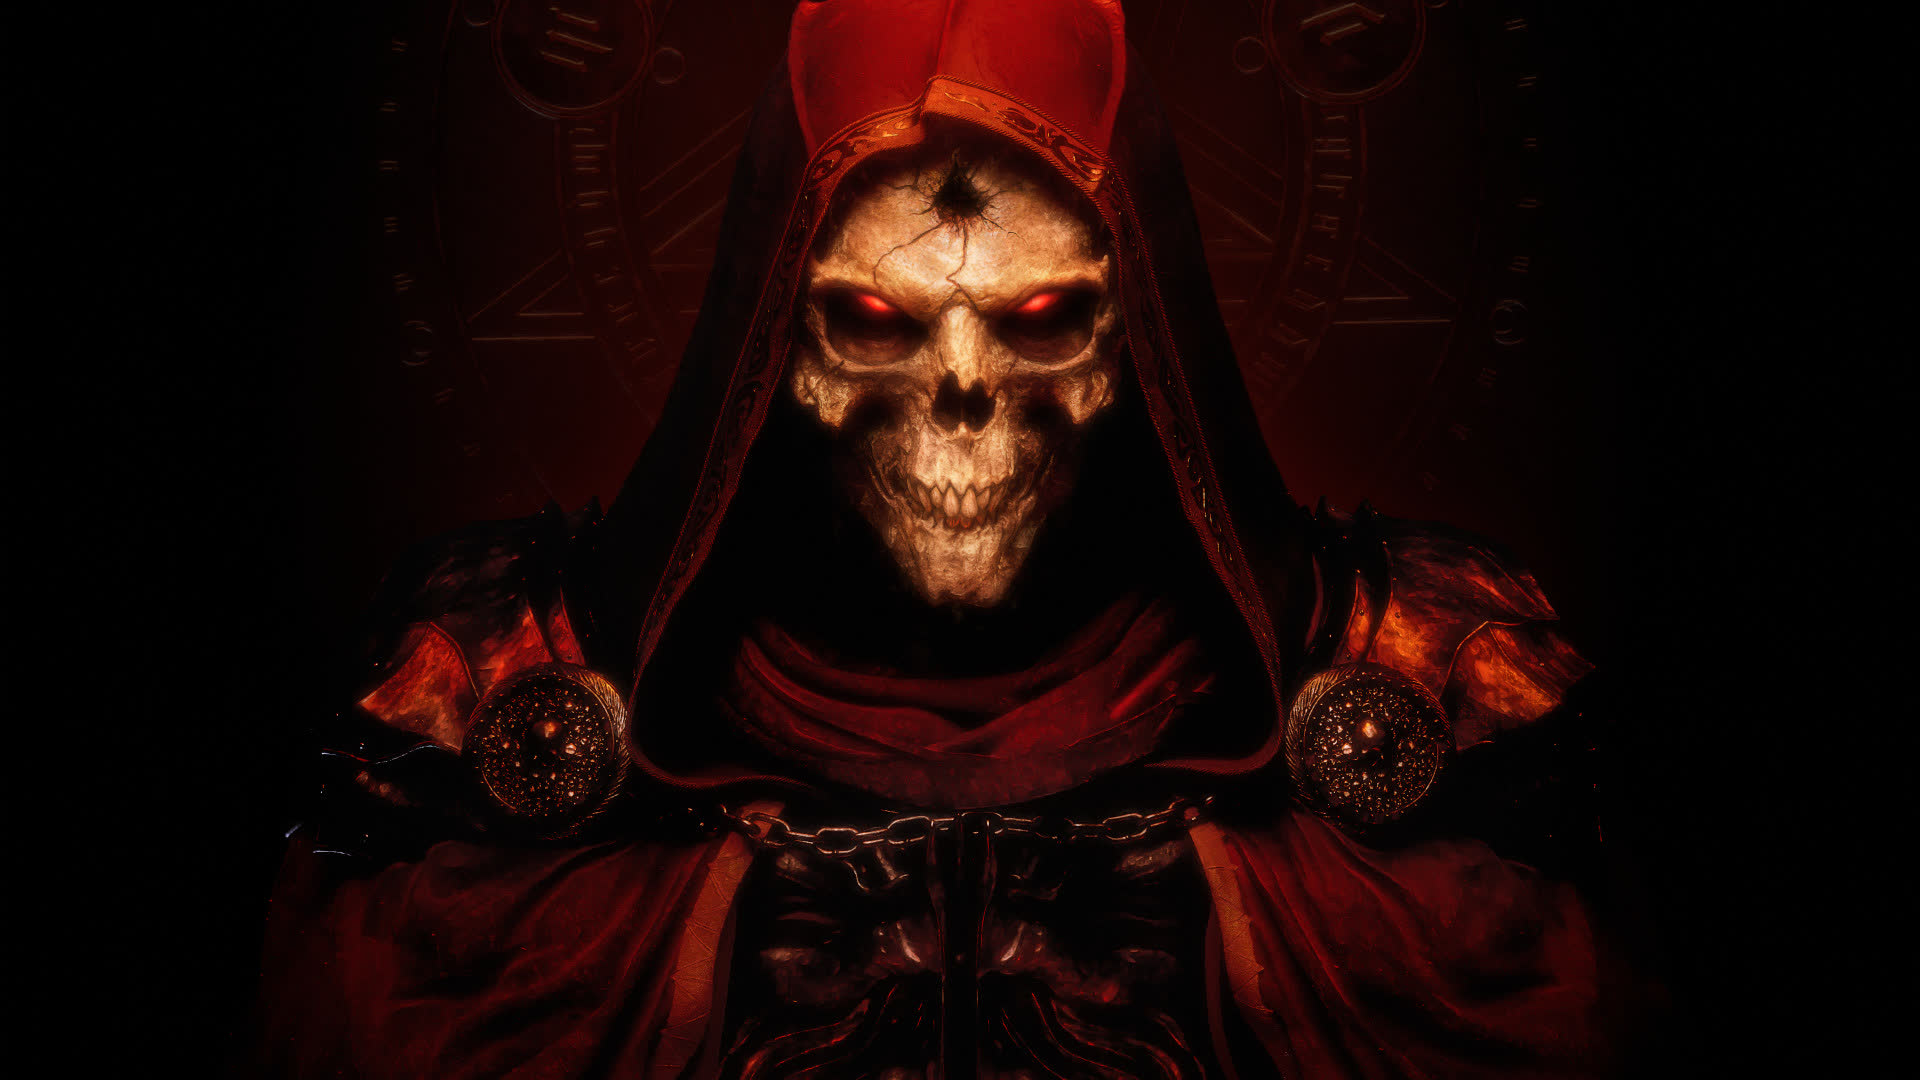 Diablo II: Resurrected gets support for Nvidia DLSS, but there are some kinks to iron out